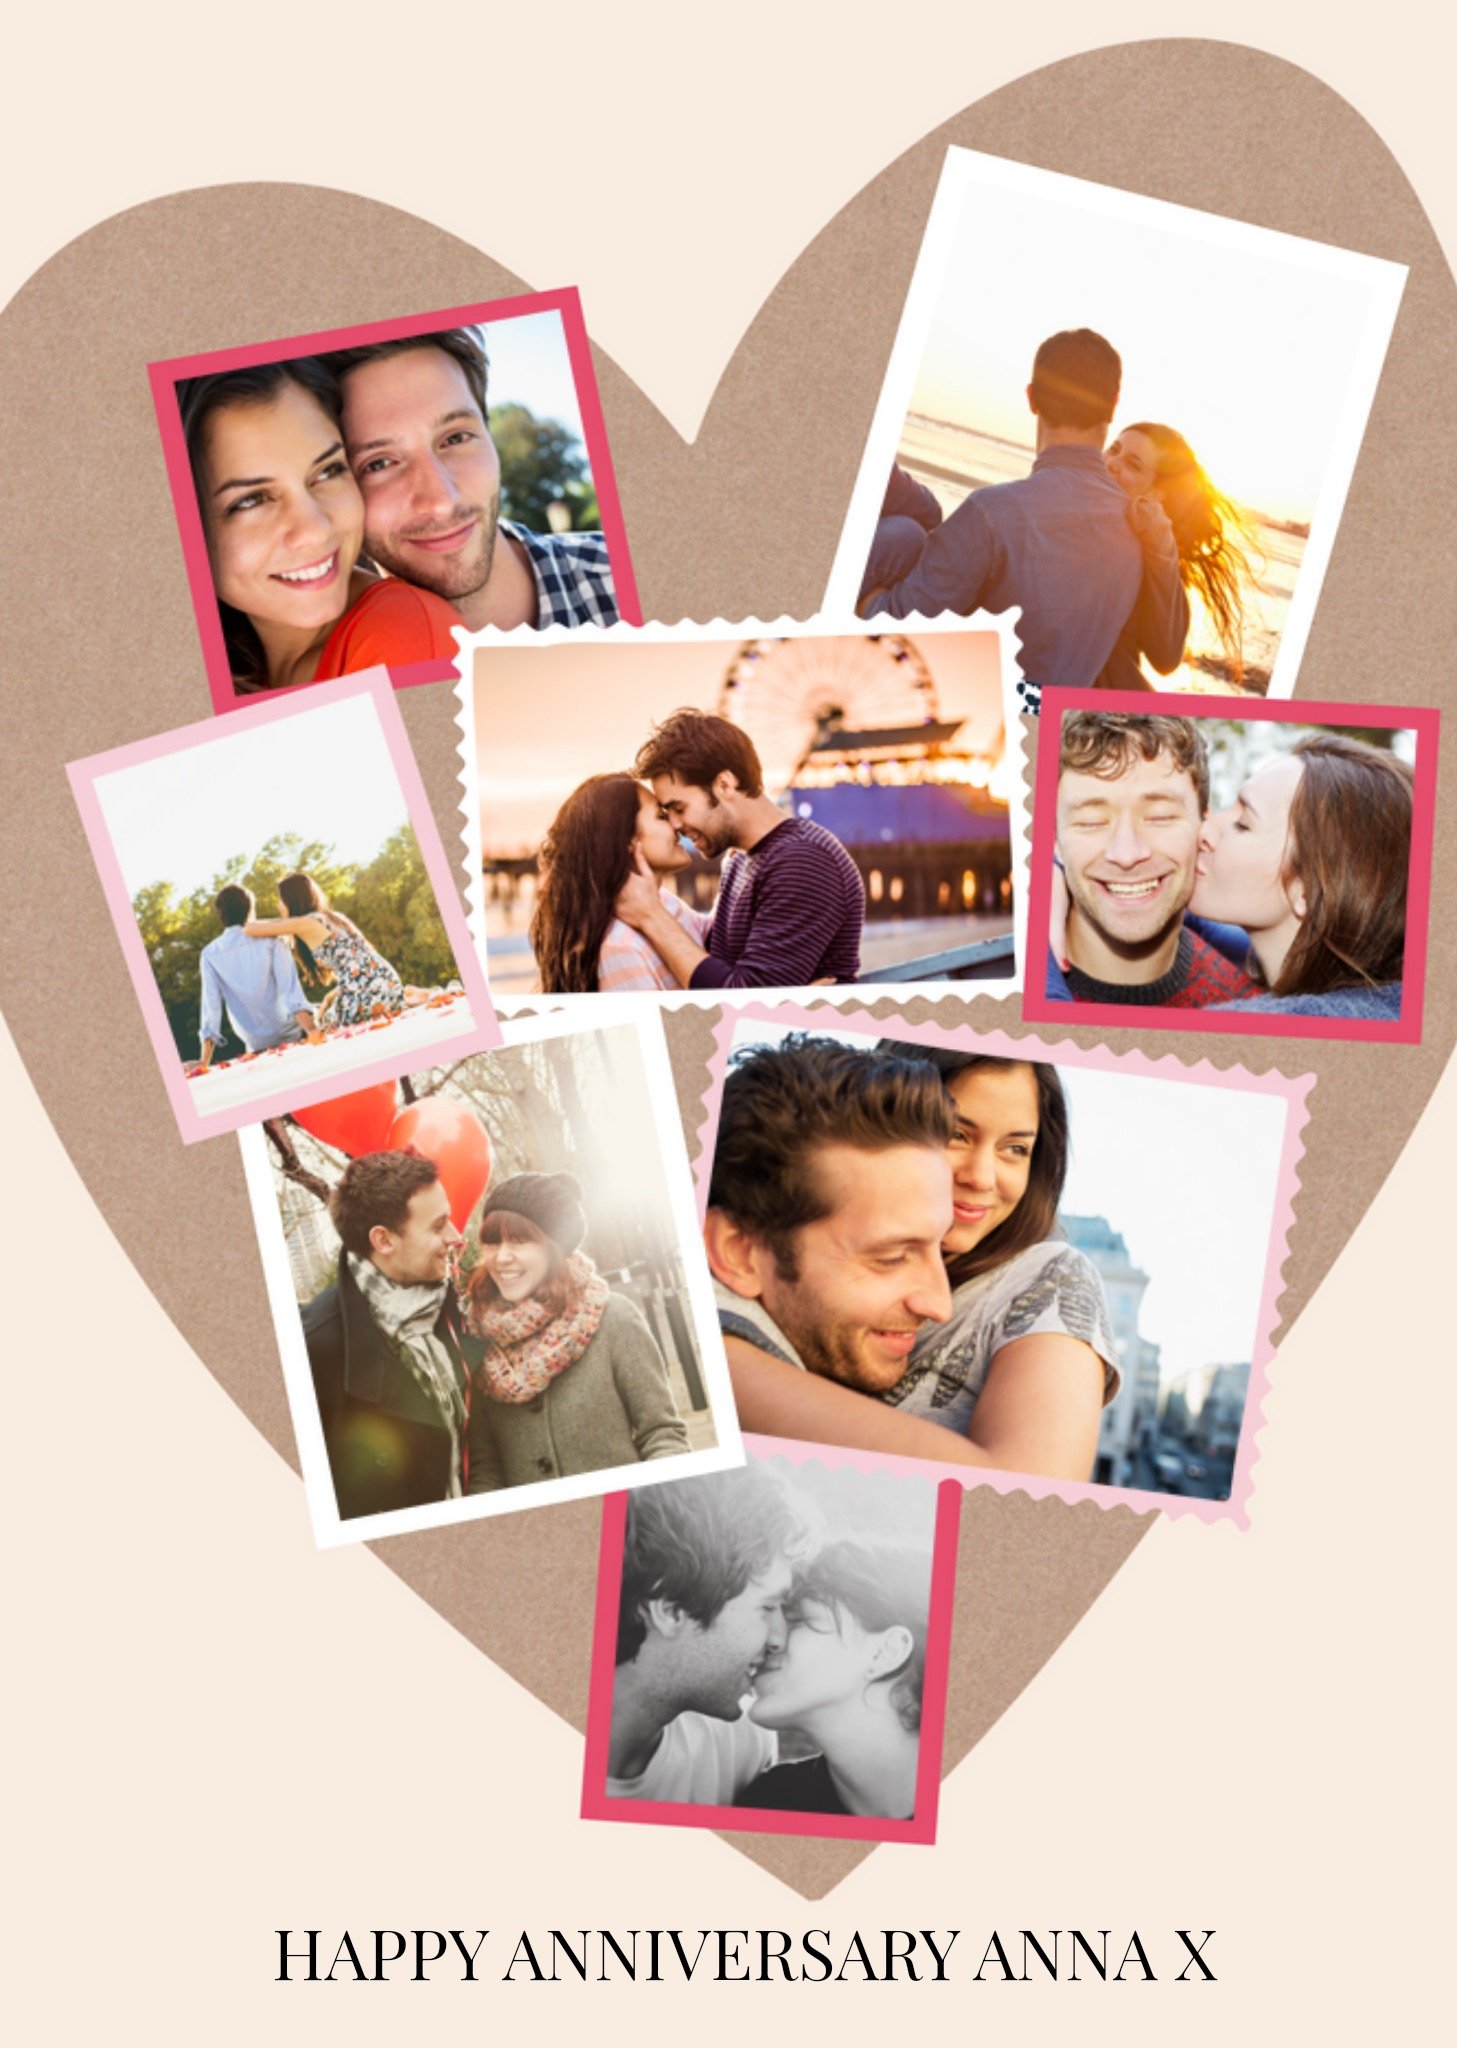 Moonpig Sweet Adoring Paper Love Heart Photo Frame Collage Photo Upload Anniversary Card, Large